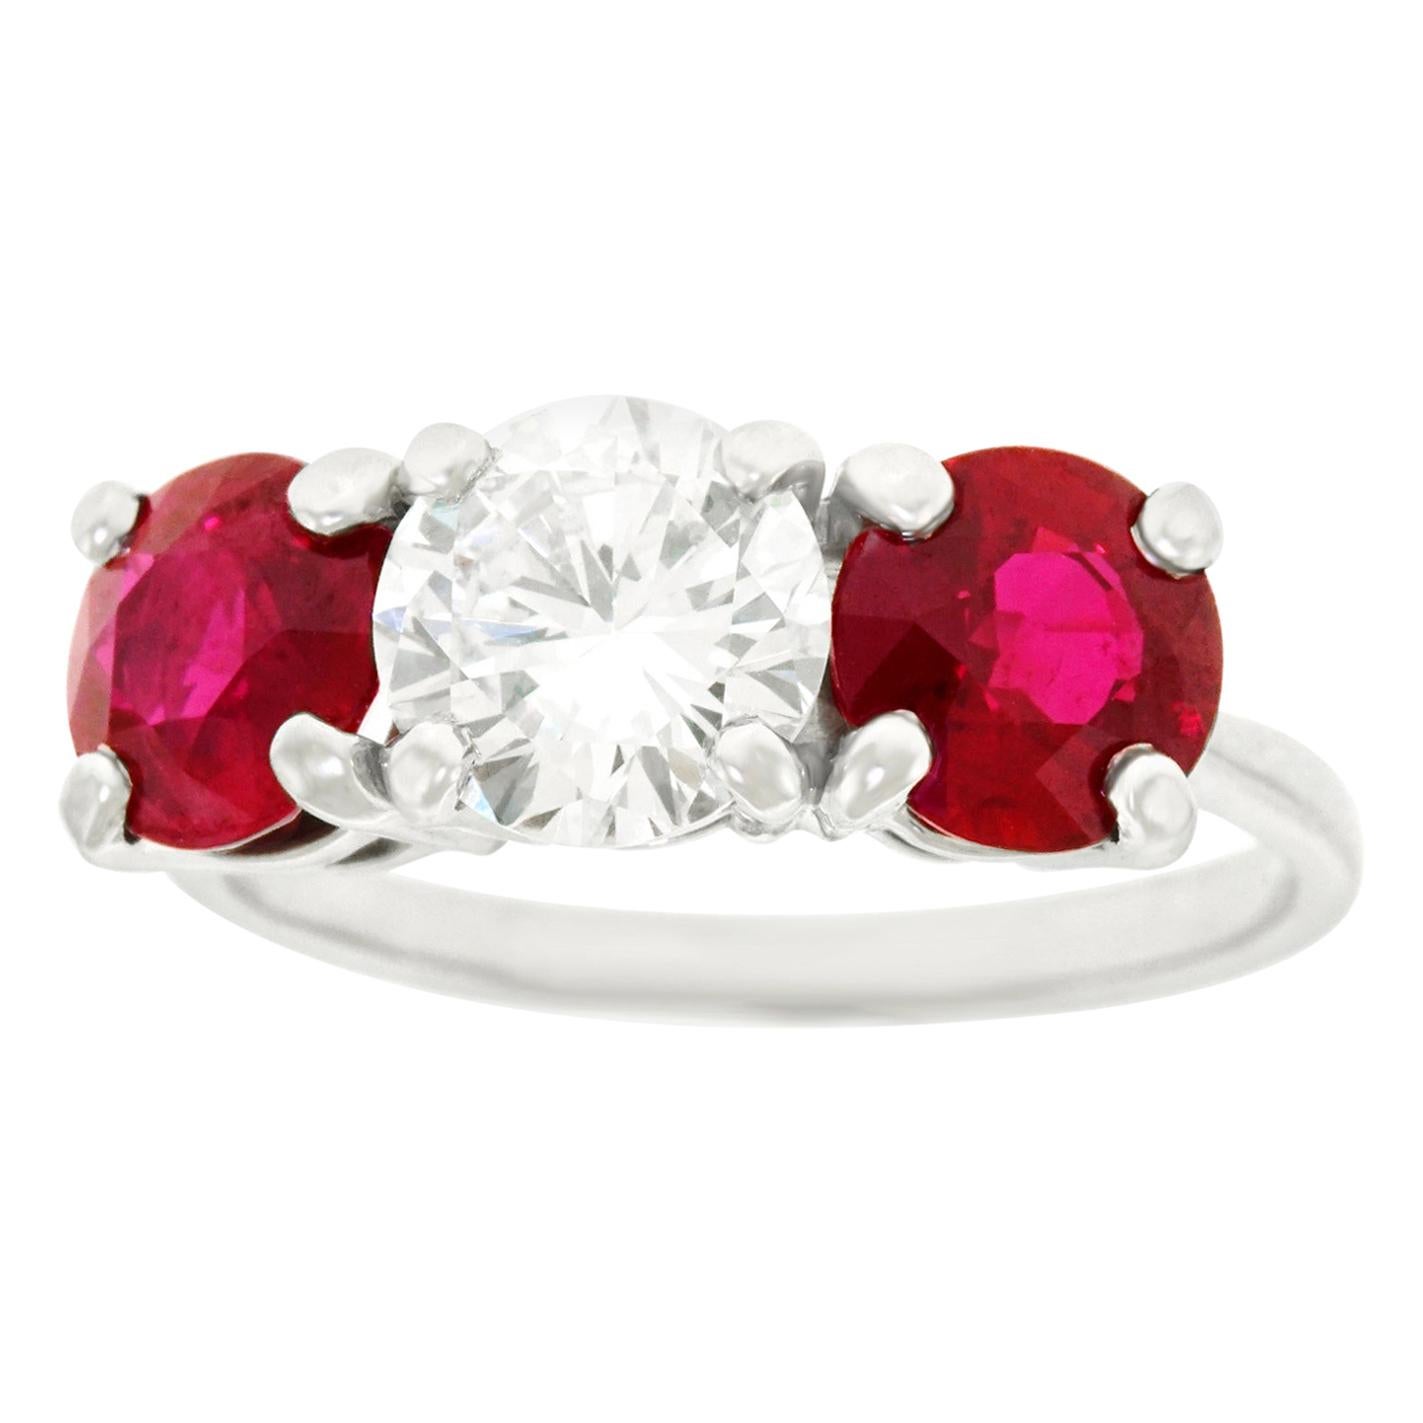 cartier ruby ring price